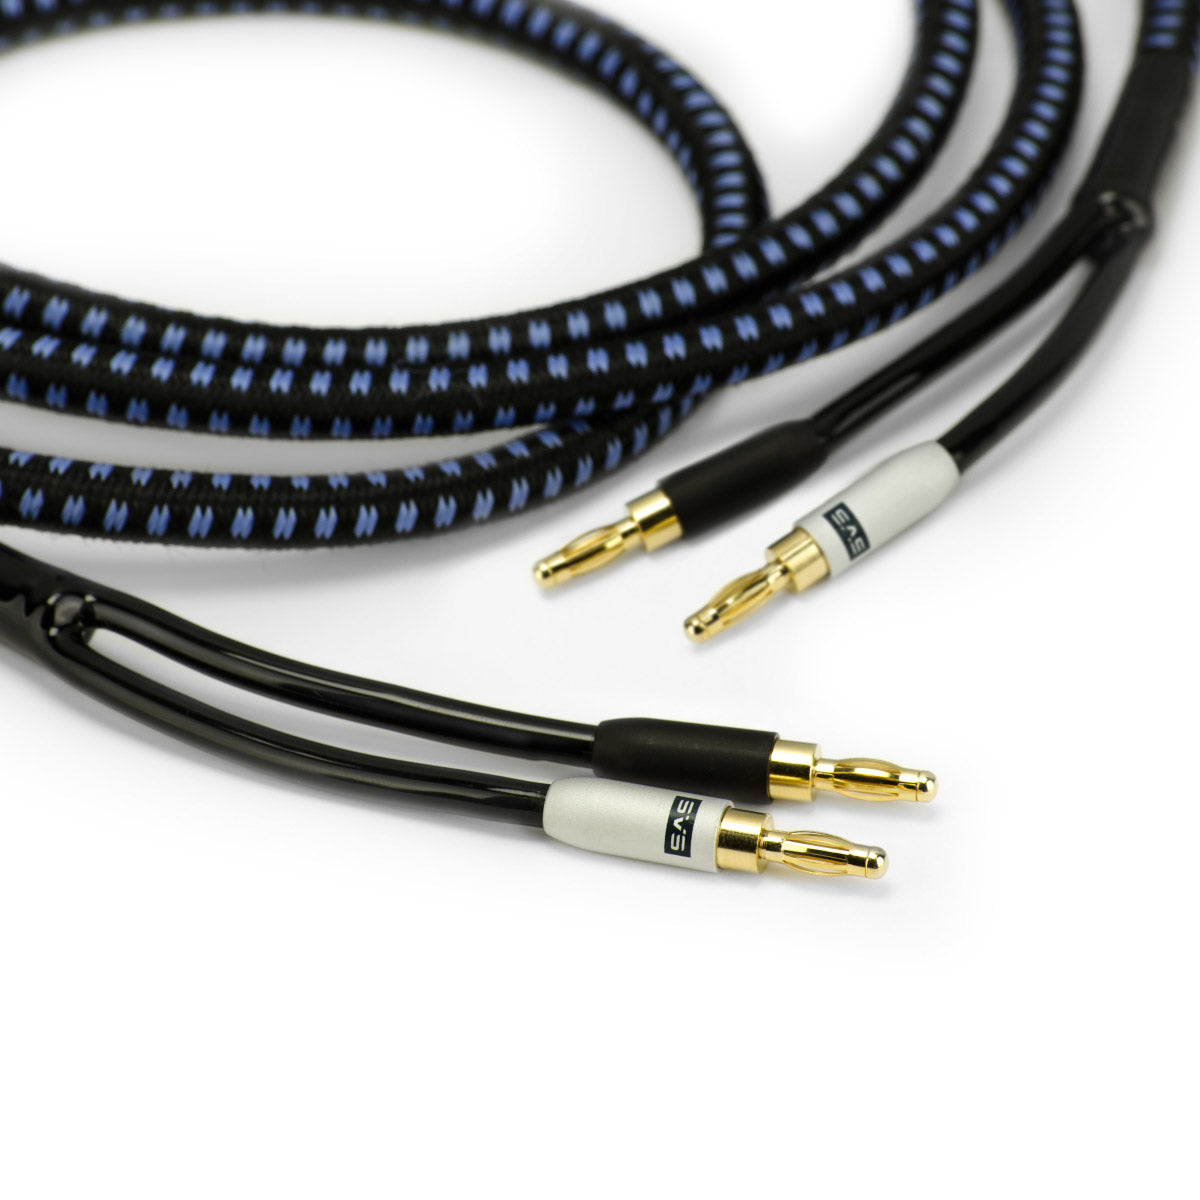 SVS SoundPath Ultra Speaker Cable - 4 ft. (1.22m) - Each